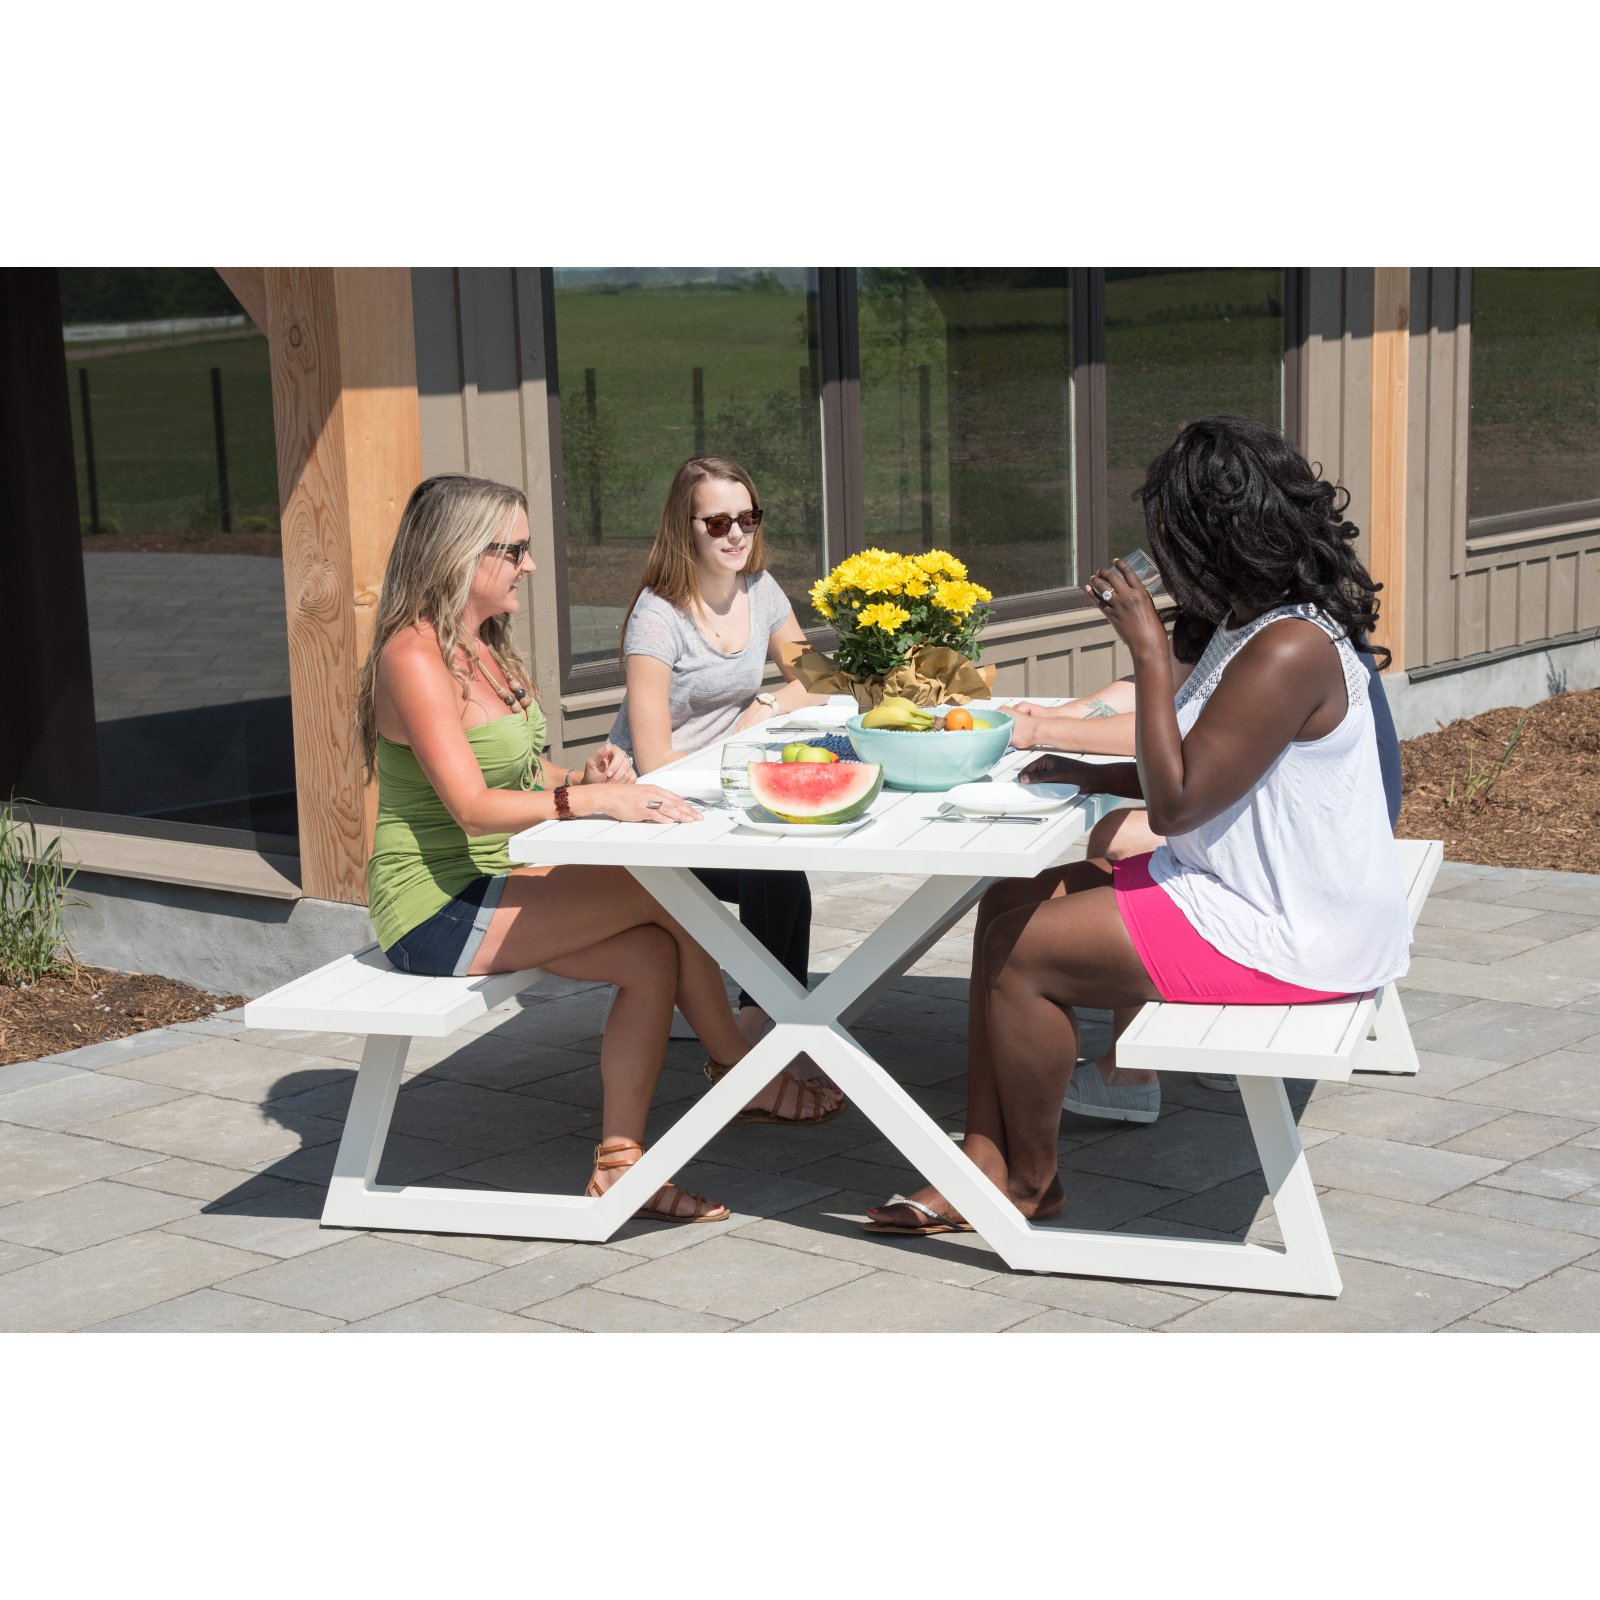 Vivere Banquet Deluxe Picnic Table - image 1 of 4